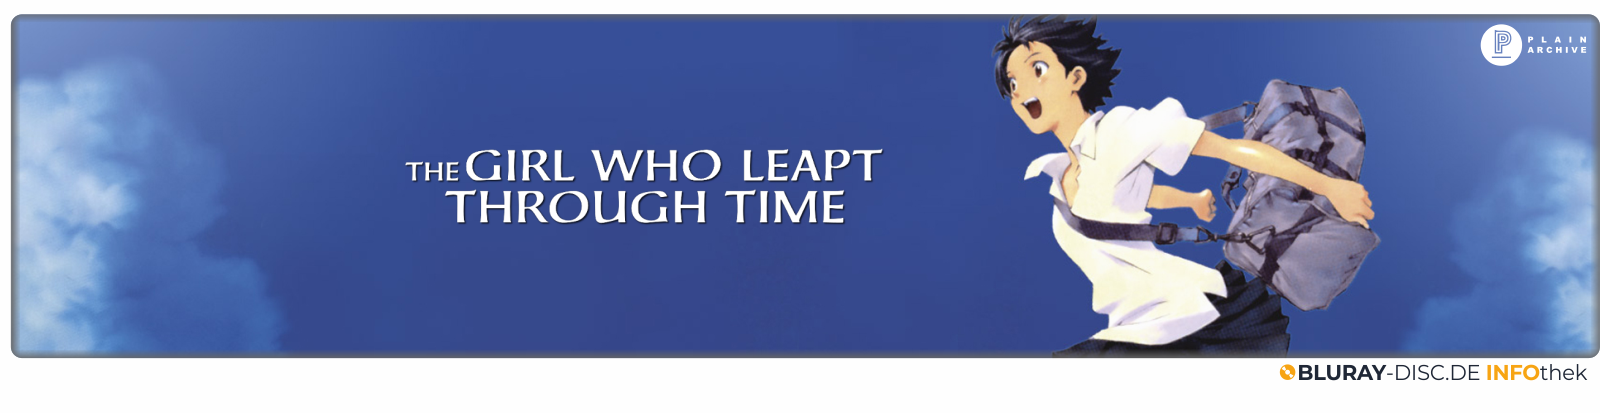 Moviebanner_Plain_Archive_The_Girl_Who_Lept_Trough_Time.png